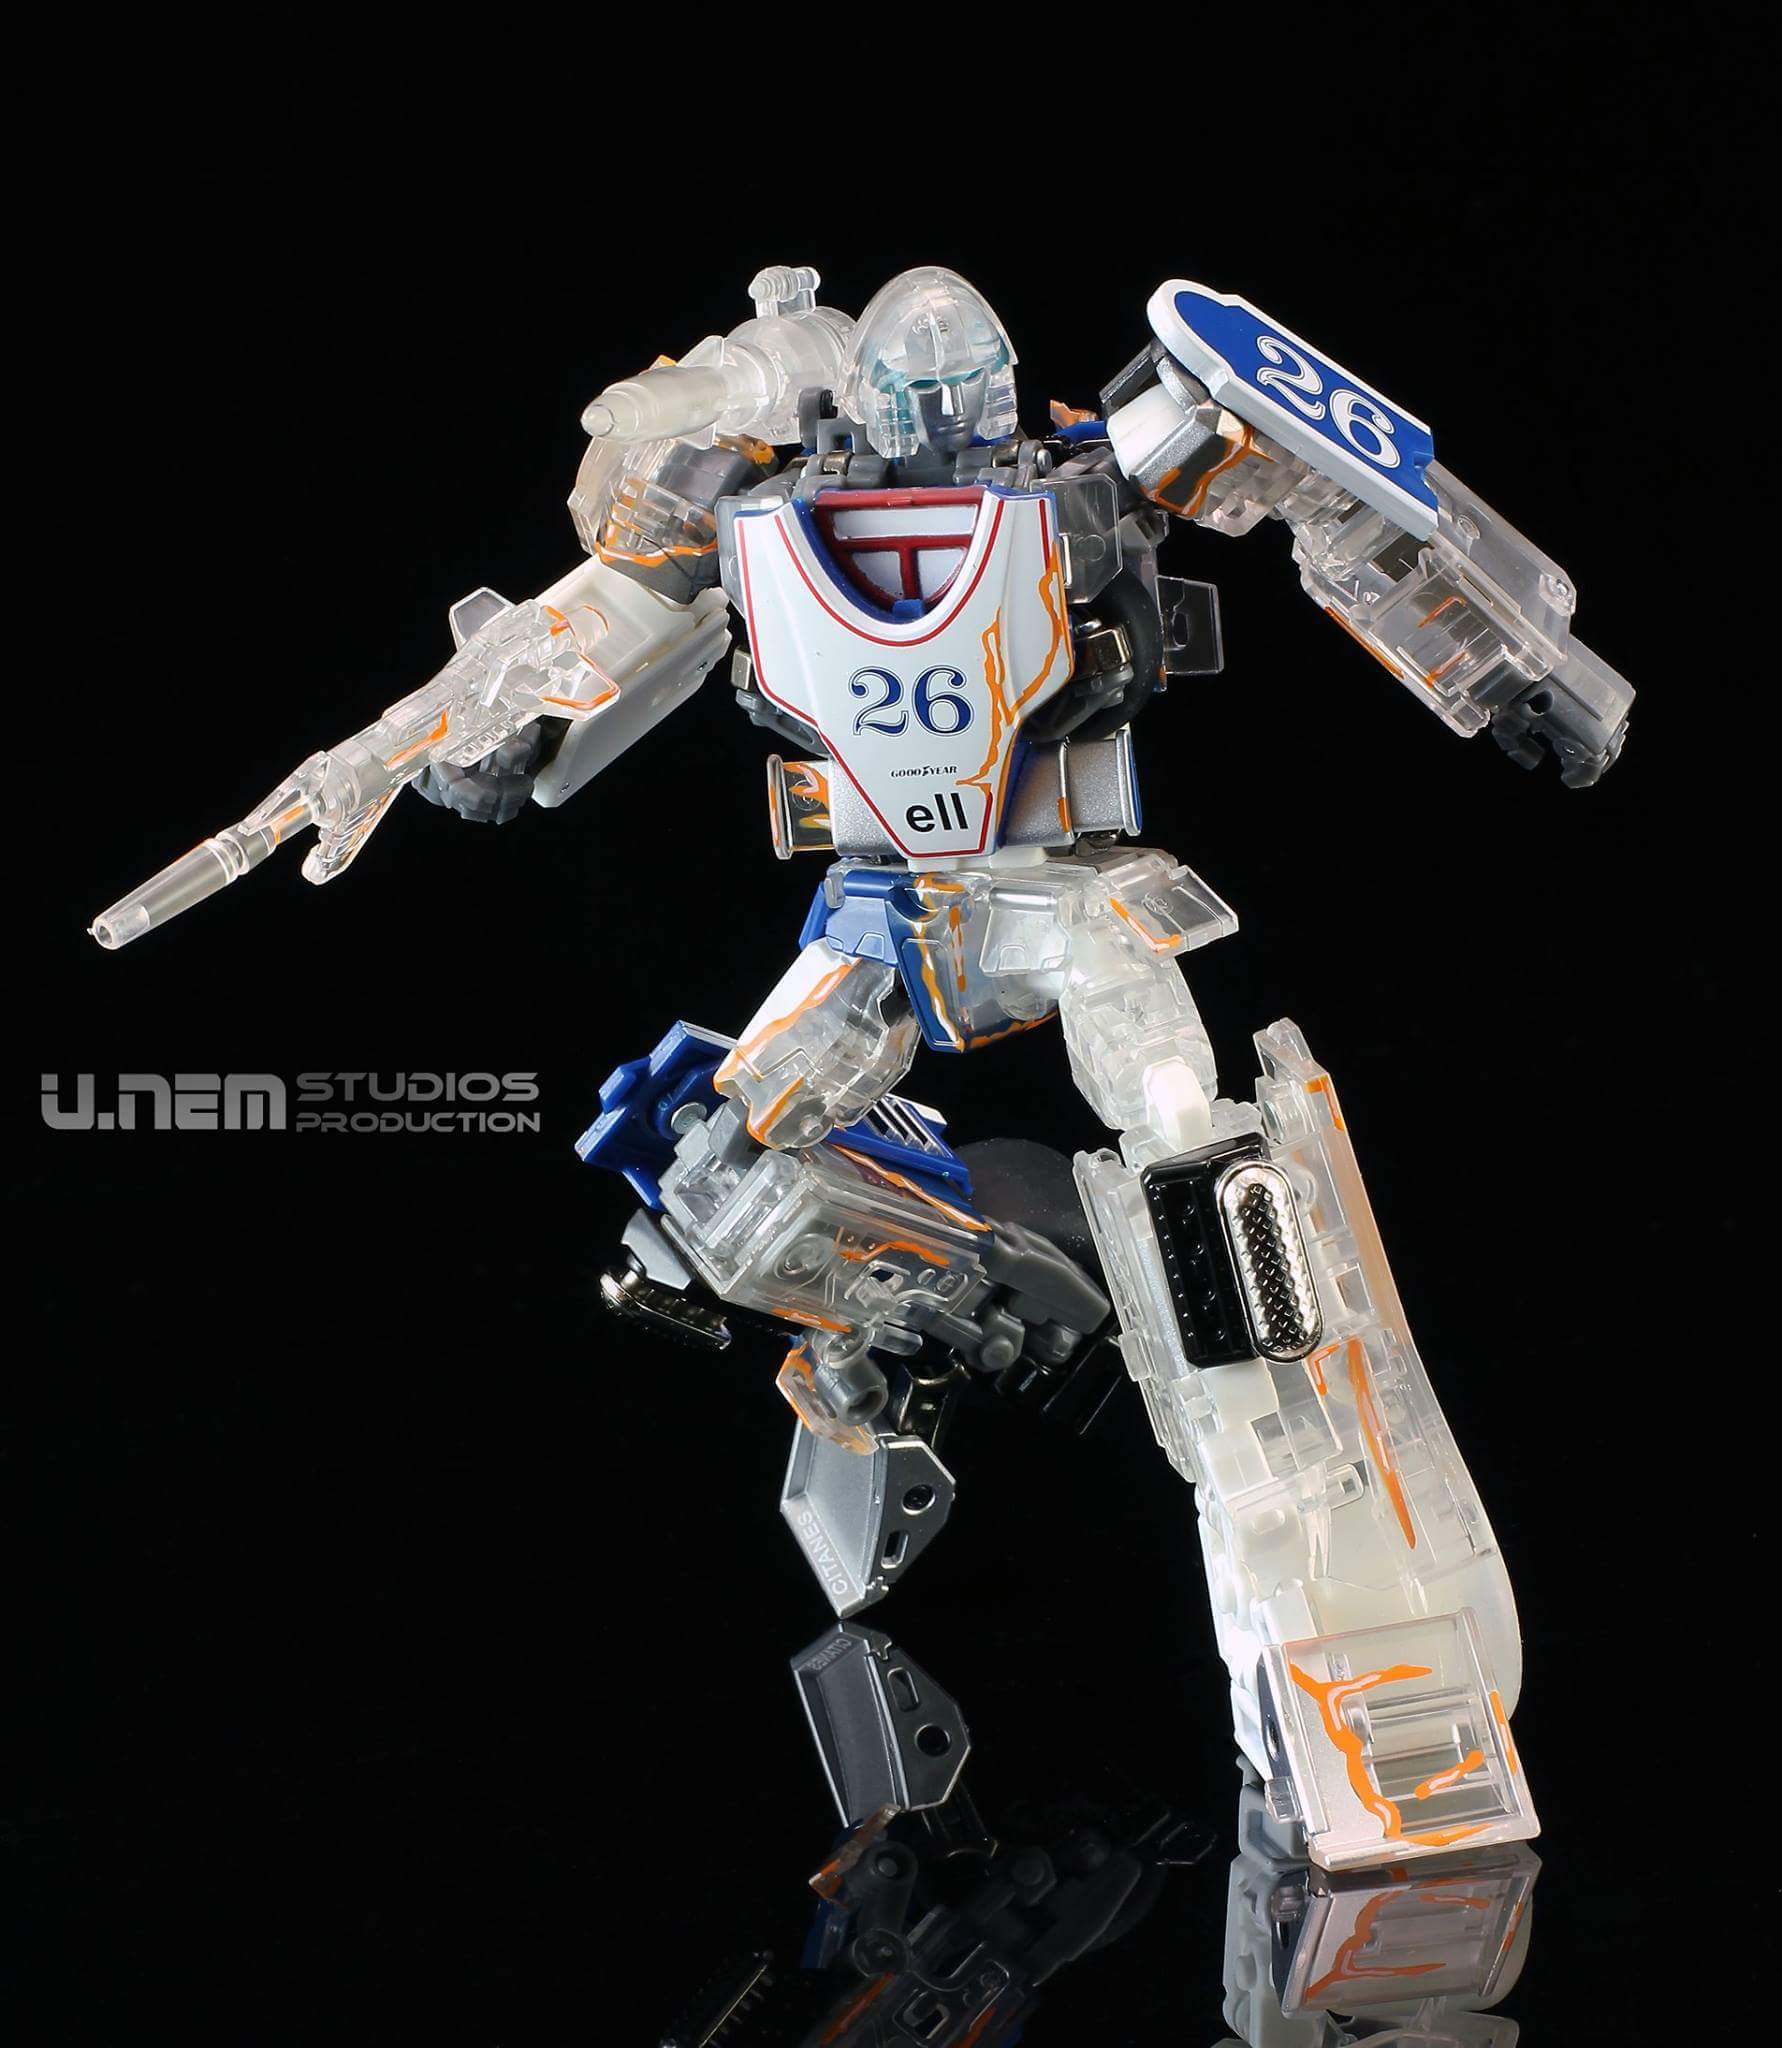 [Ocular Max] Produit Tiers - PS-01 Sphinx (aka Mirage G1) + PS-02 Liger (aka Mirage Diaclone) - Page 3 NUcunCM2